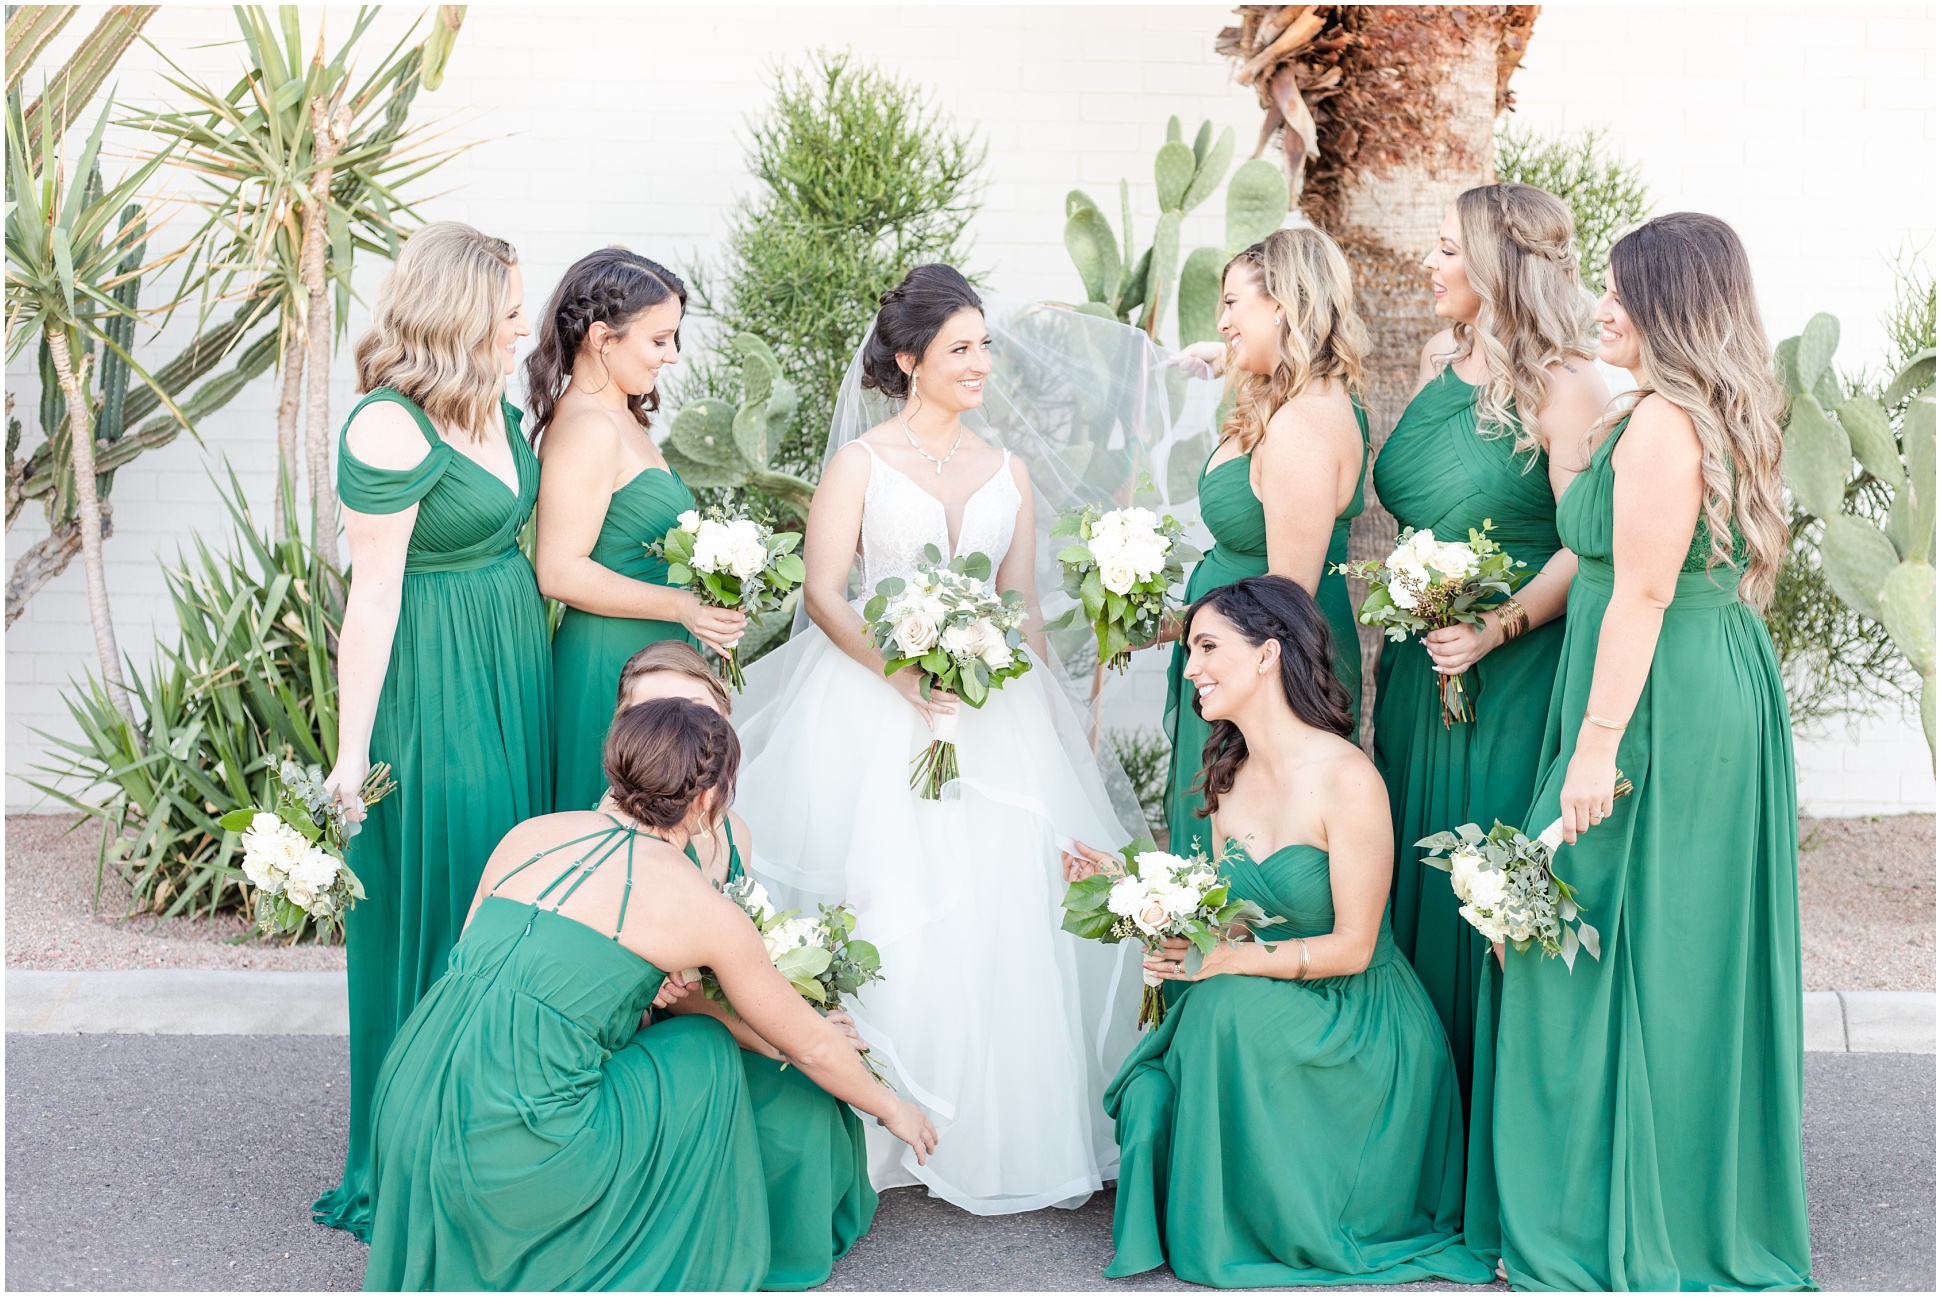 Group photo of bridesmaids touching up bride